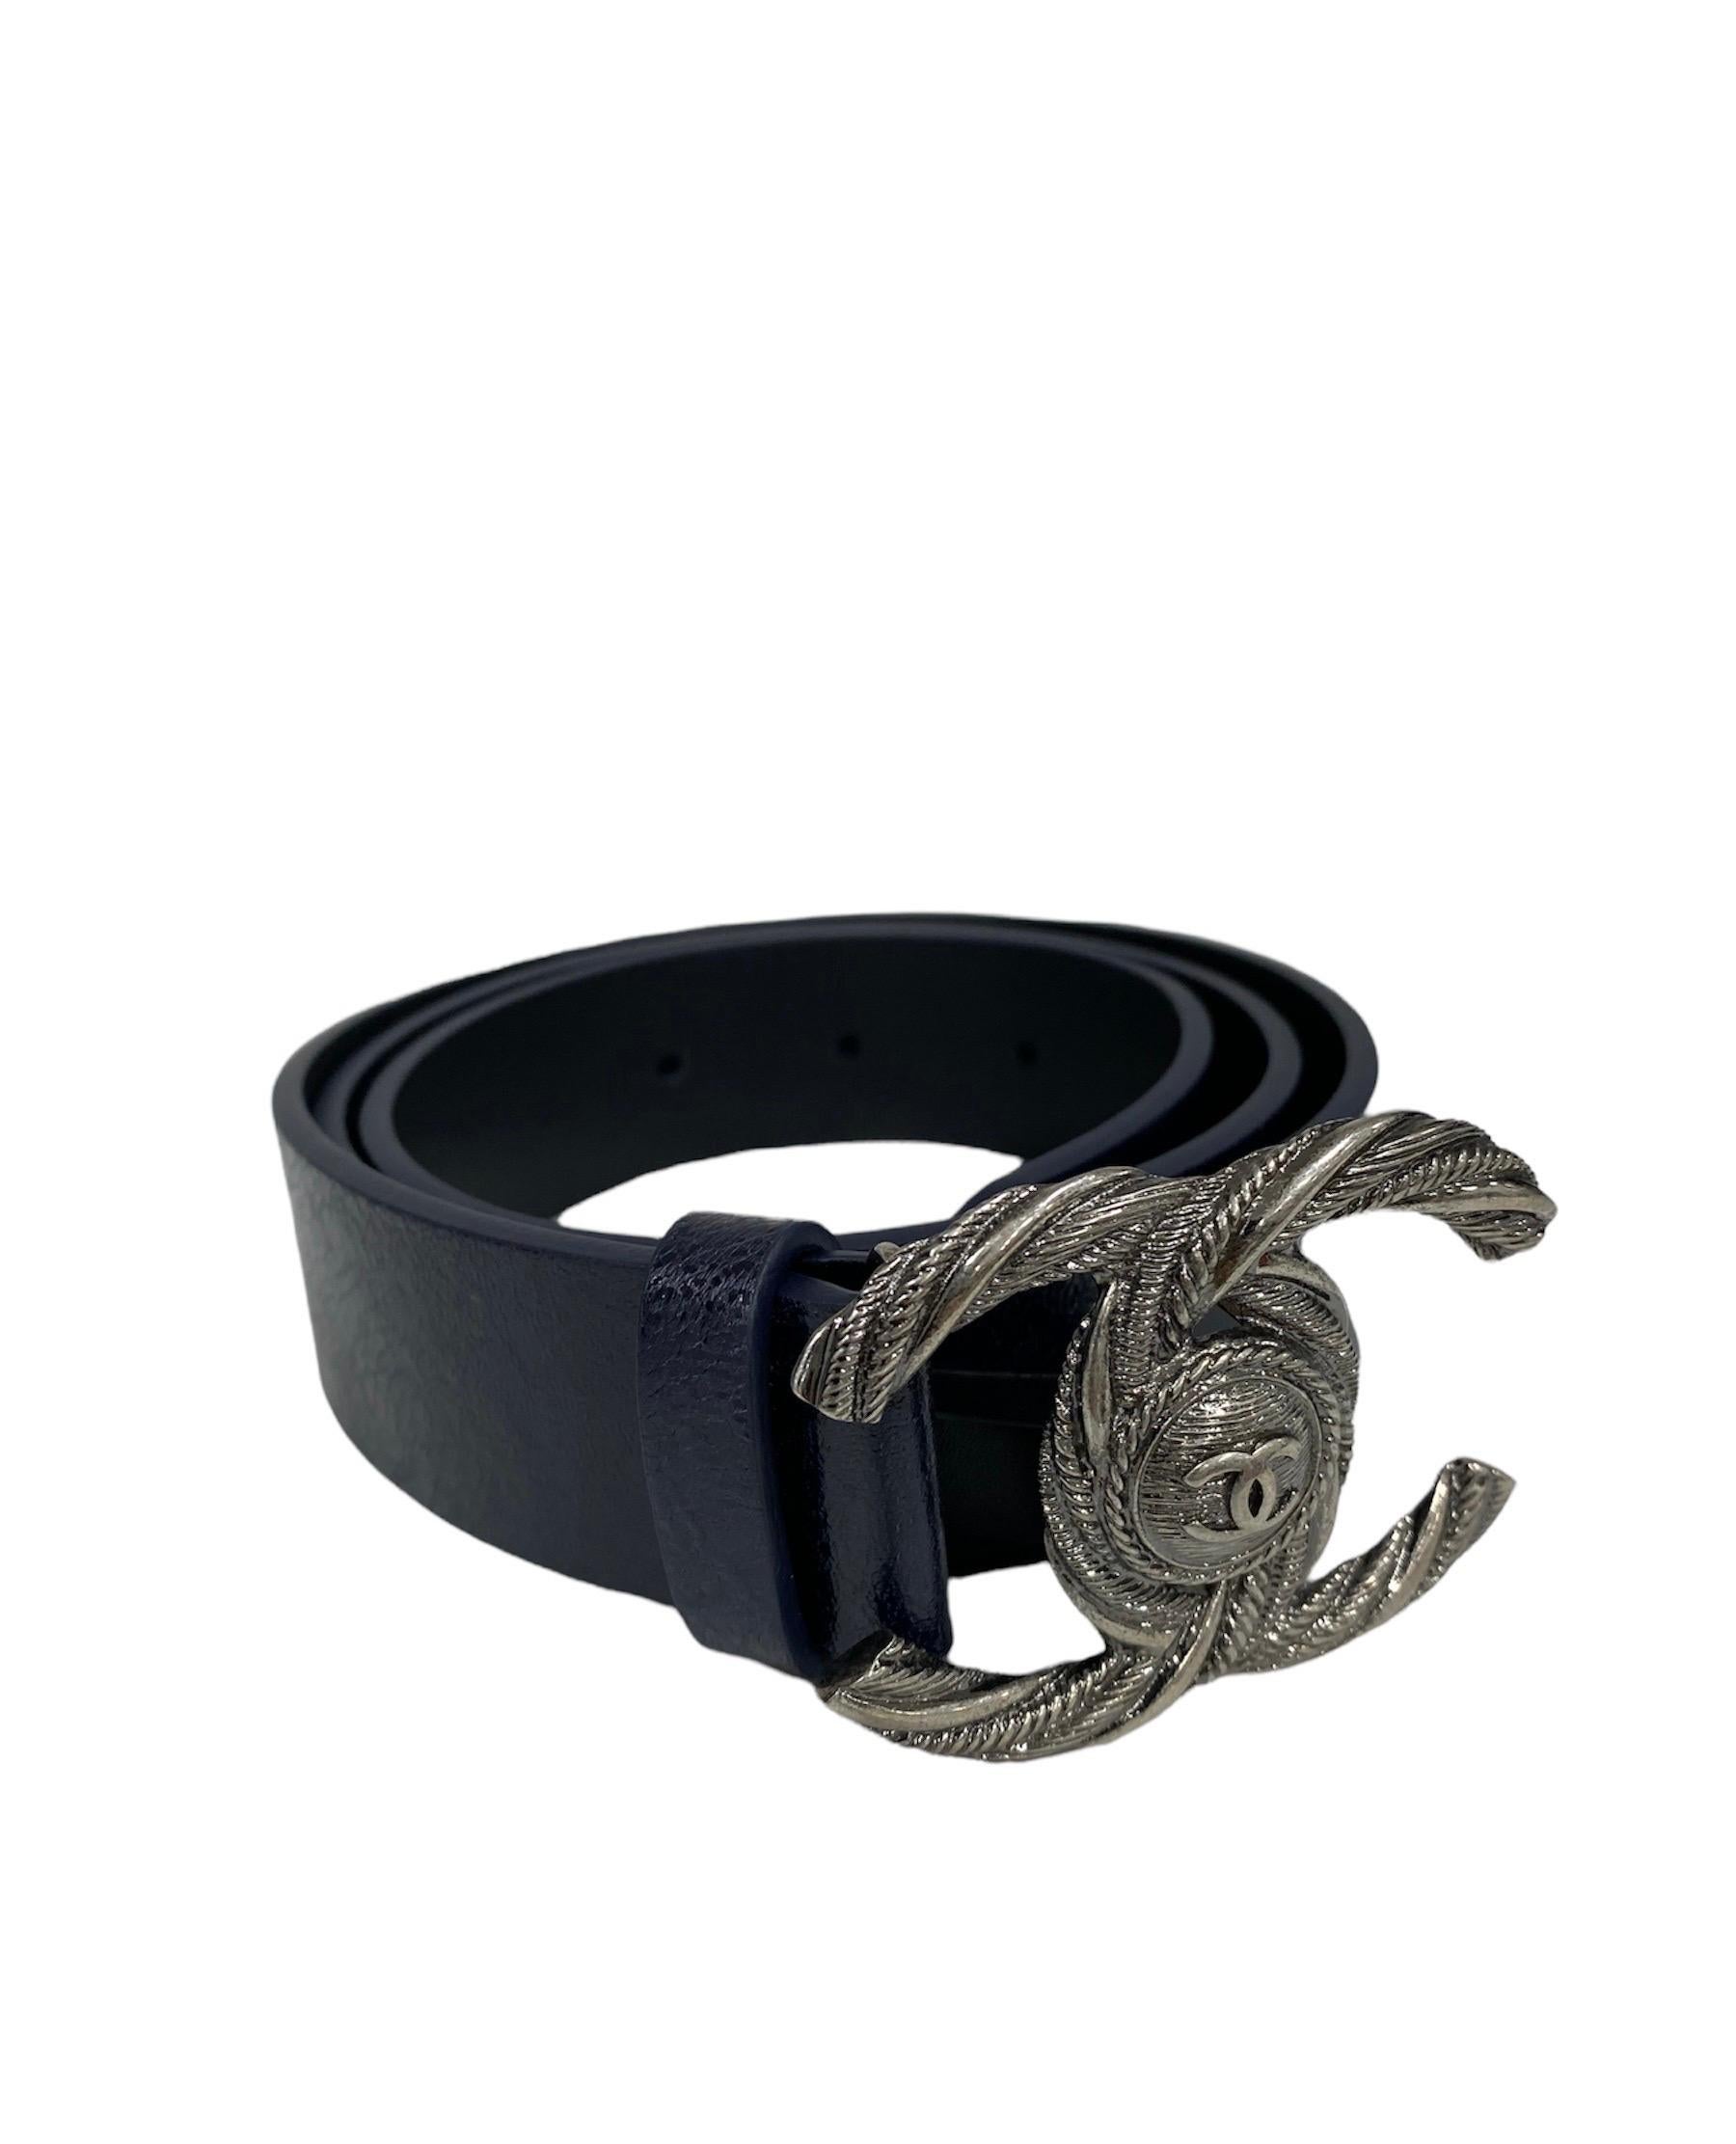 Chanel designer belt, made of smooth blue leather with silver hardware.
It measures 85cm in length and 3cm in height. Equipped with a buckle with embedded CC logo. Conditions like new.